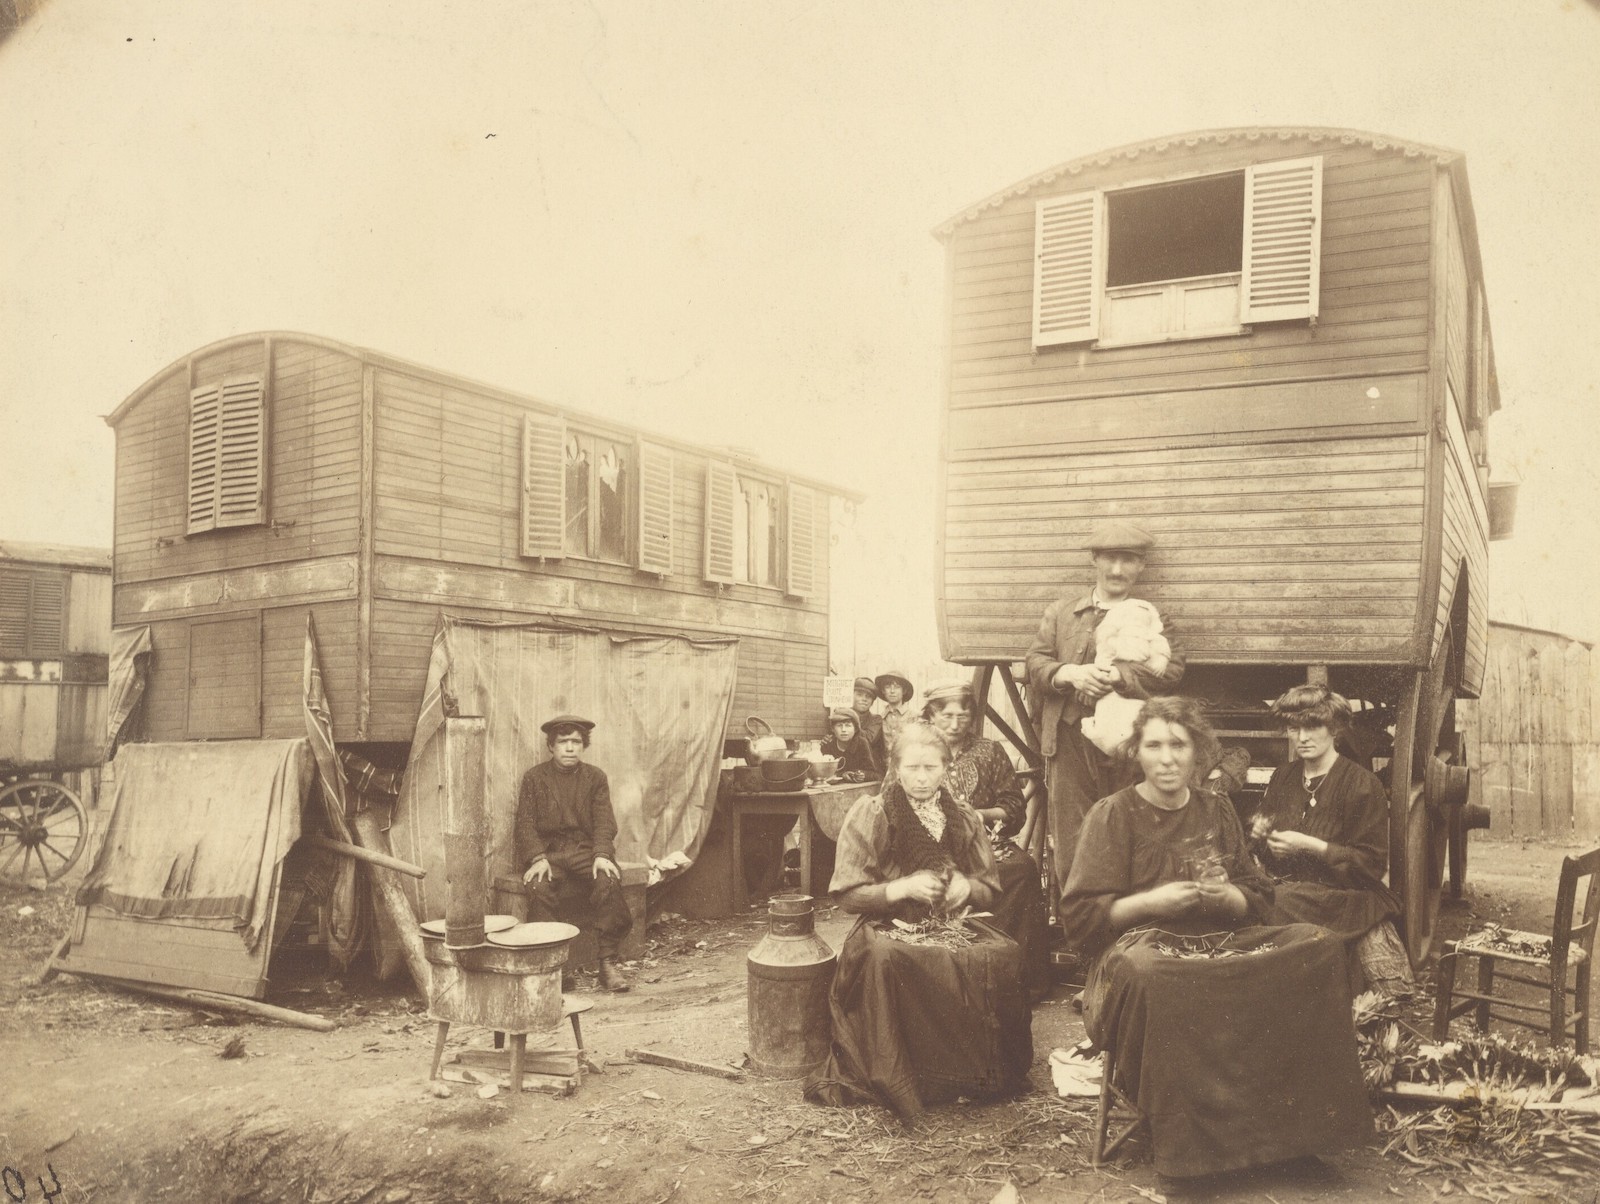 A Roma camp on the outskirts of paris by photographer Eugène Atget, c. 1913